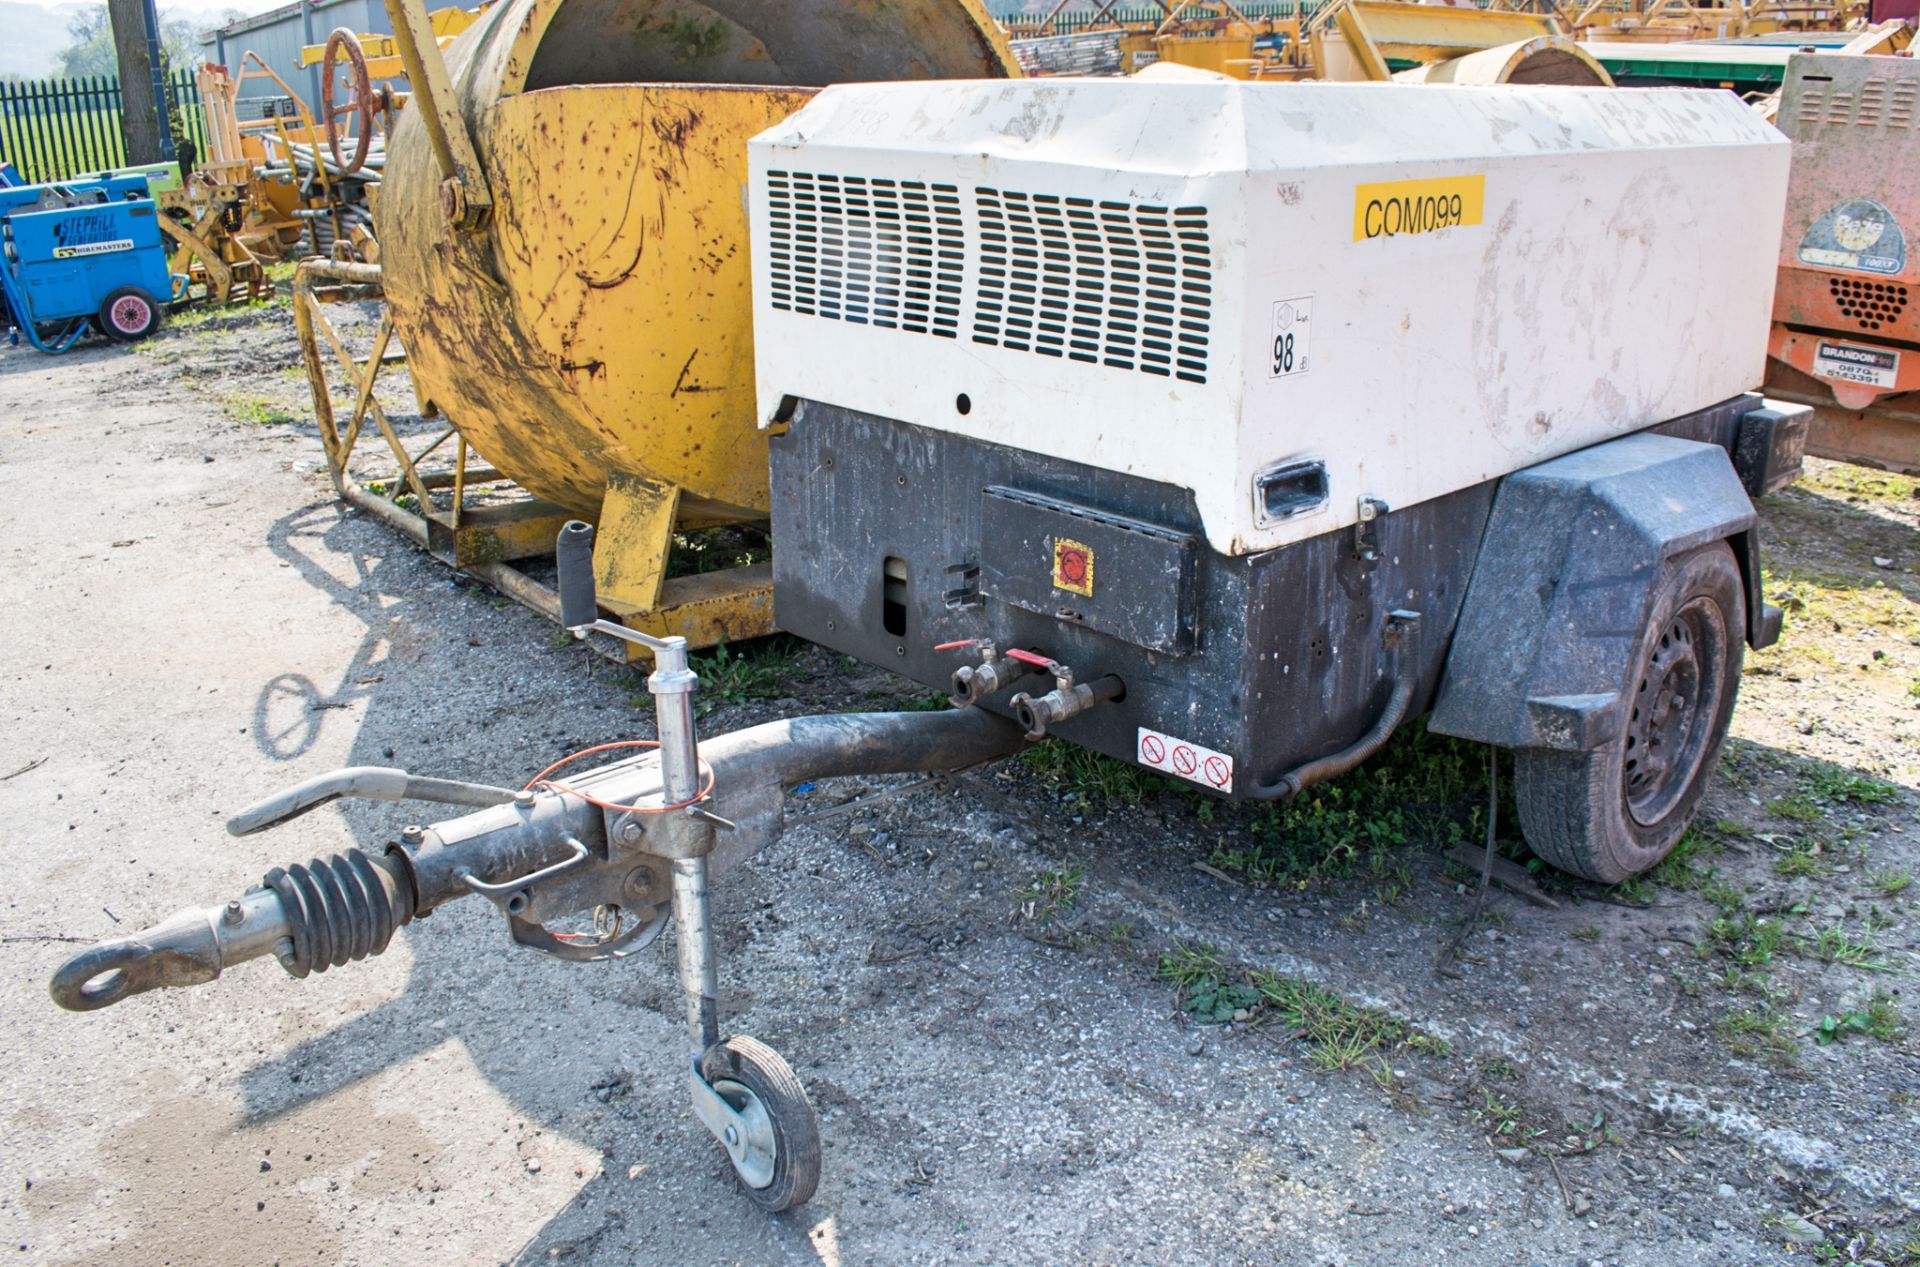 Ingersoll Rand 726 diesel driven mobile air compressor Year: 2010 S/N: 108584 Recorded Hours: 959